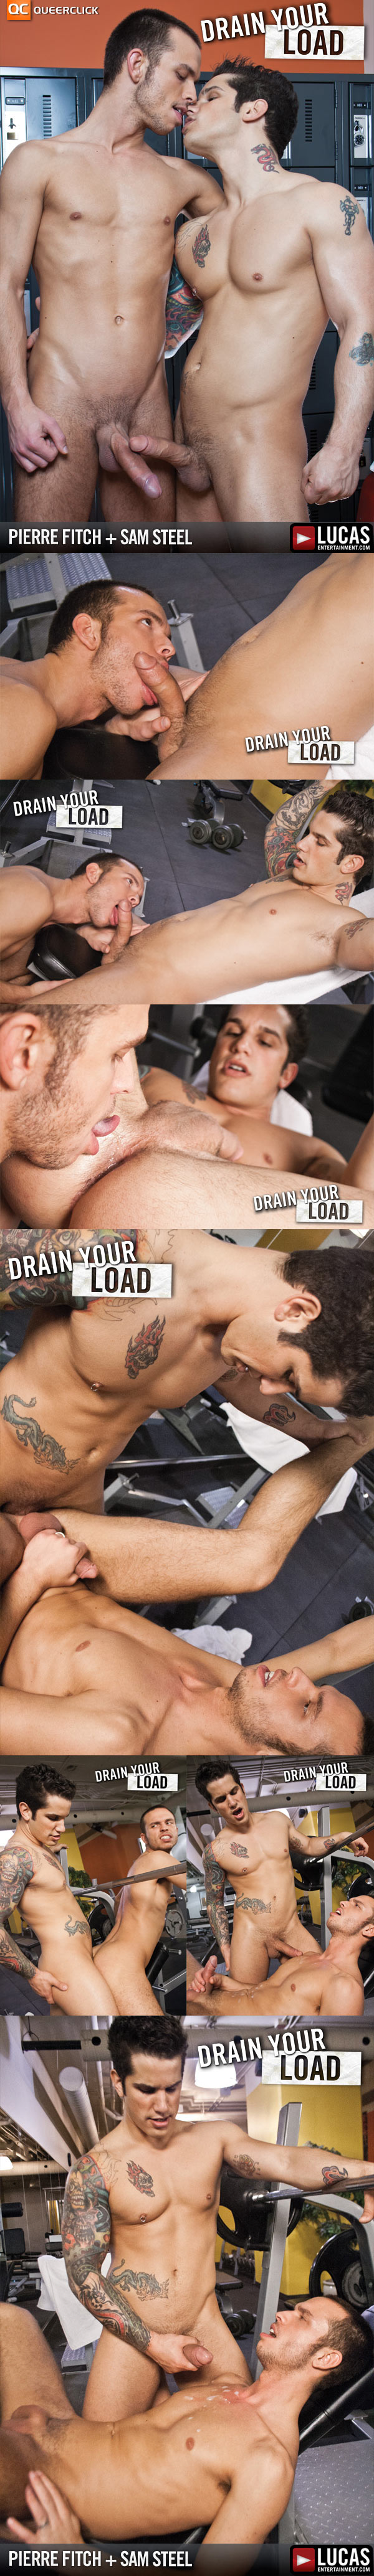 Drain Your Load with Lucas Entertainment